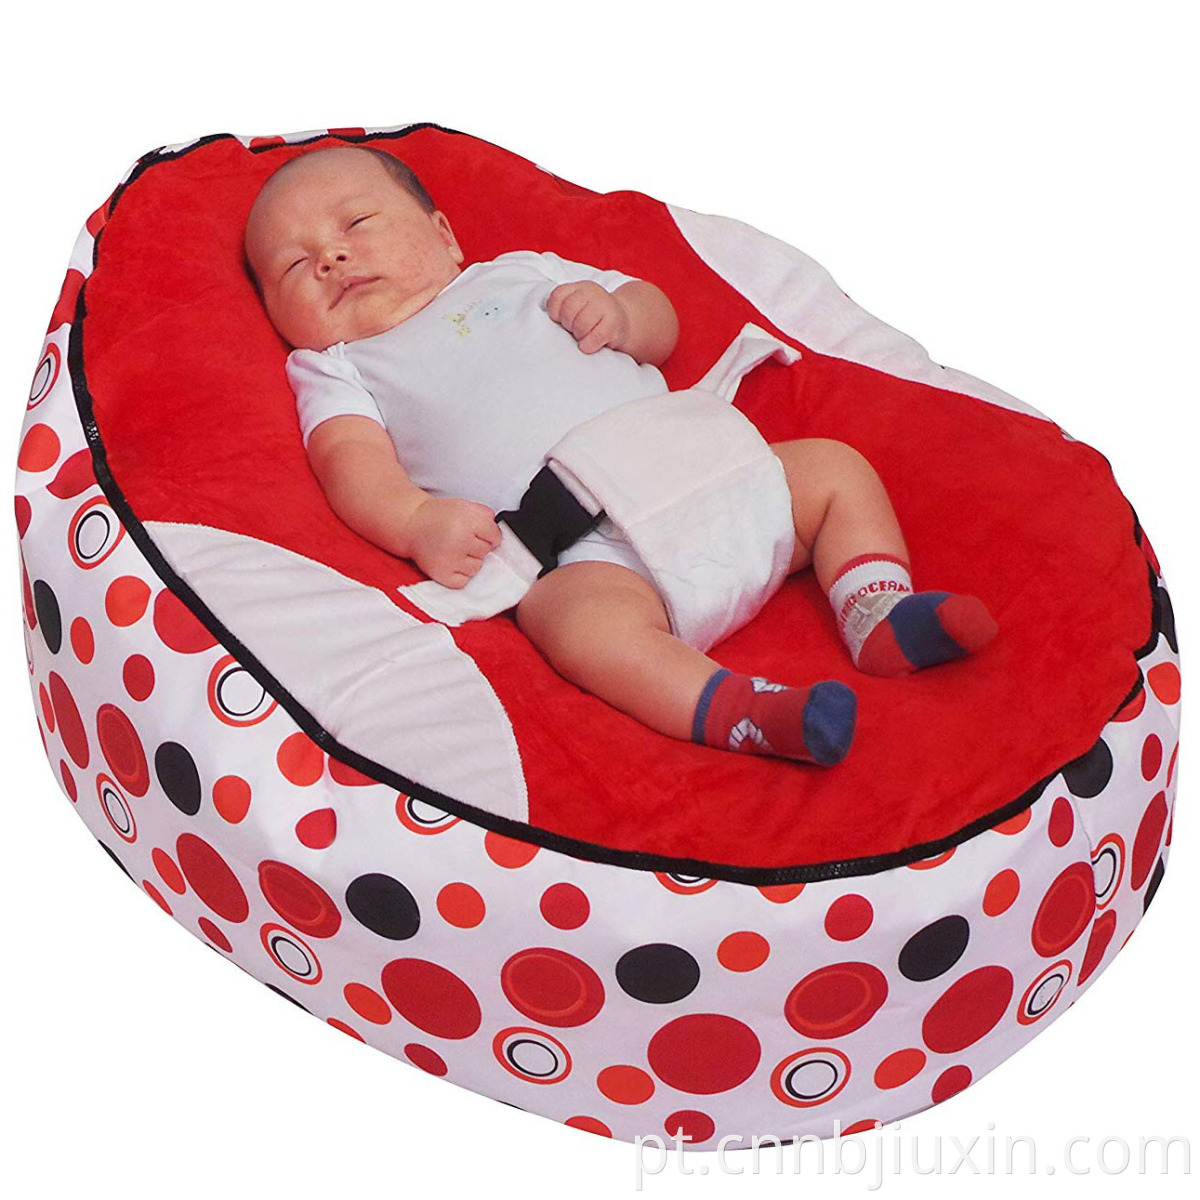 Baby harness safety beanbag chair